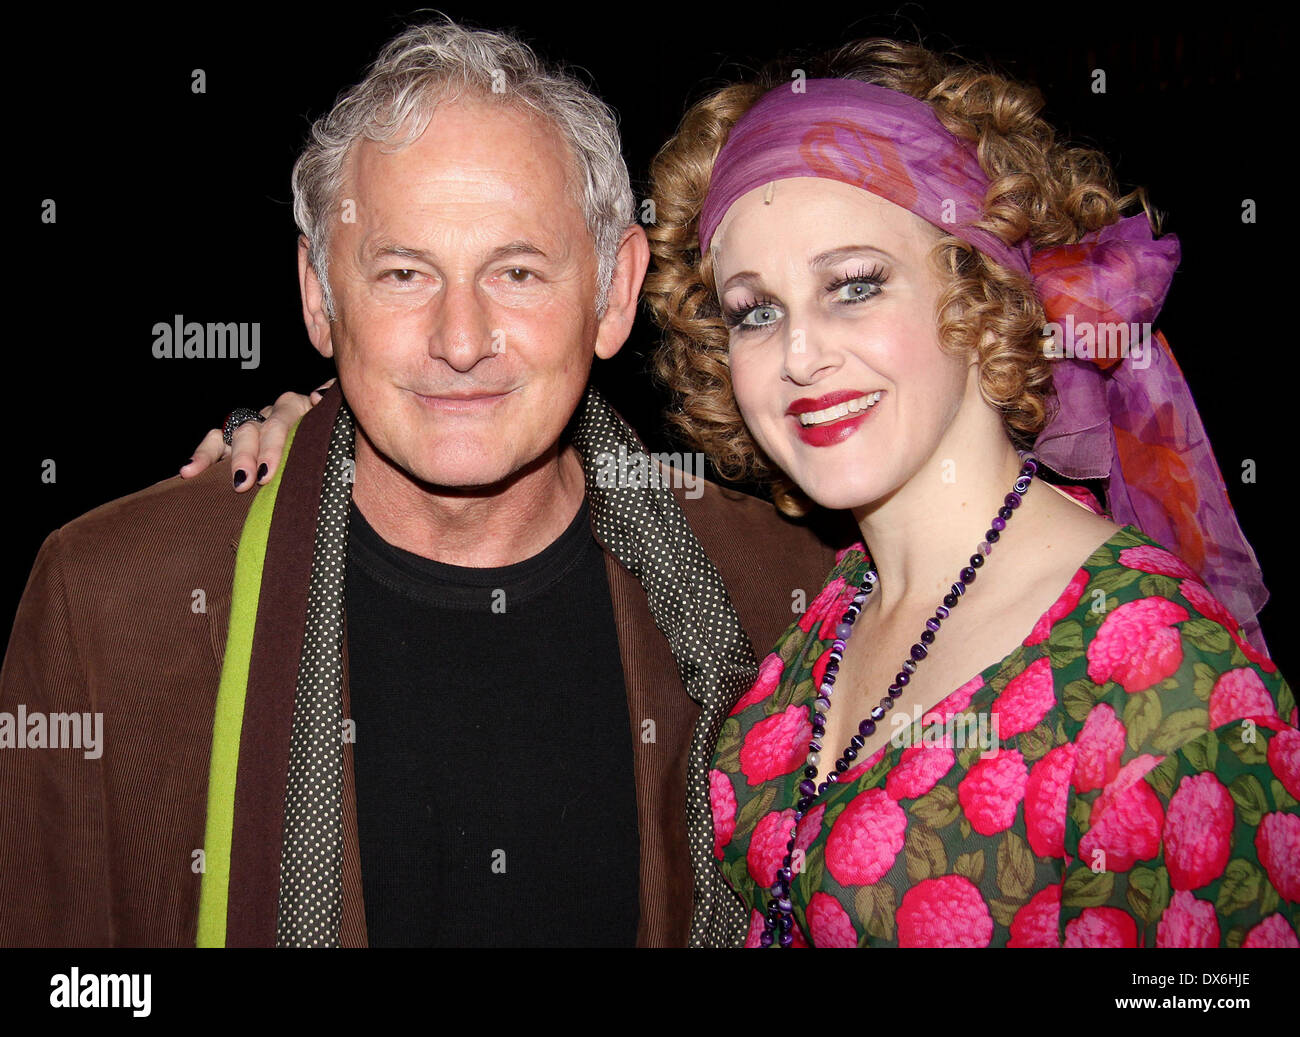 Victor Garber Stock Photos & Victor Garber Stock Images - Alamy